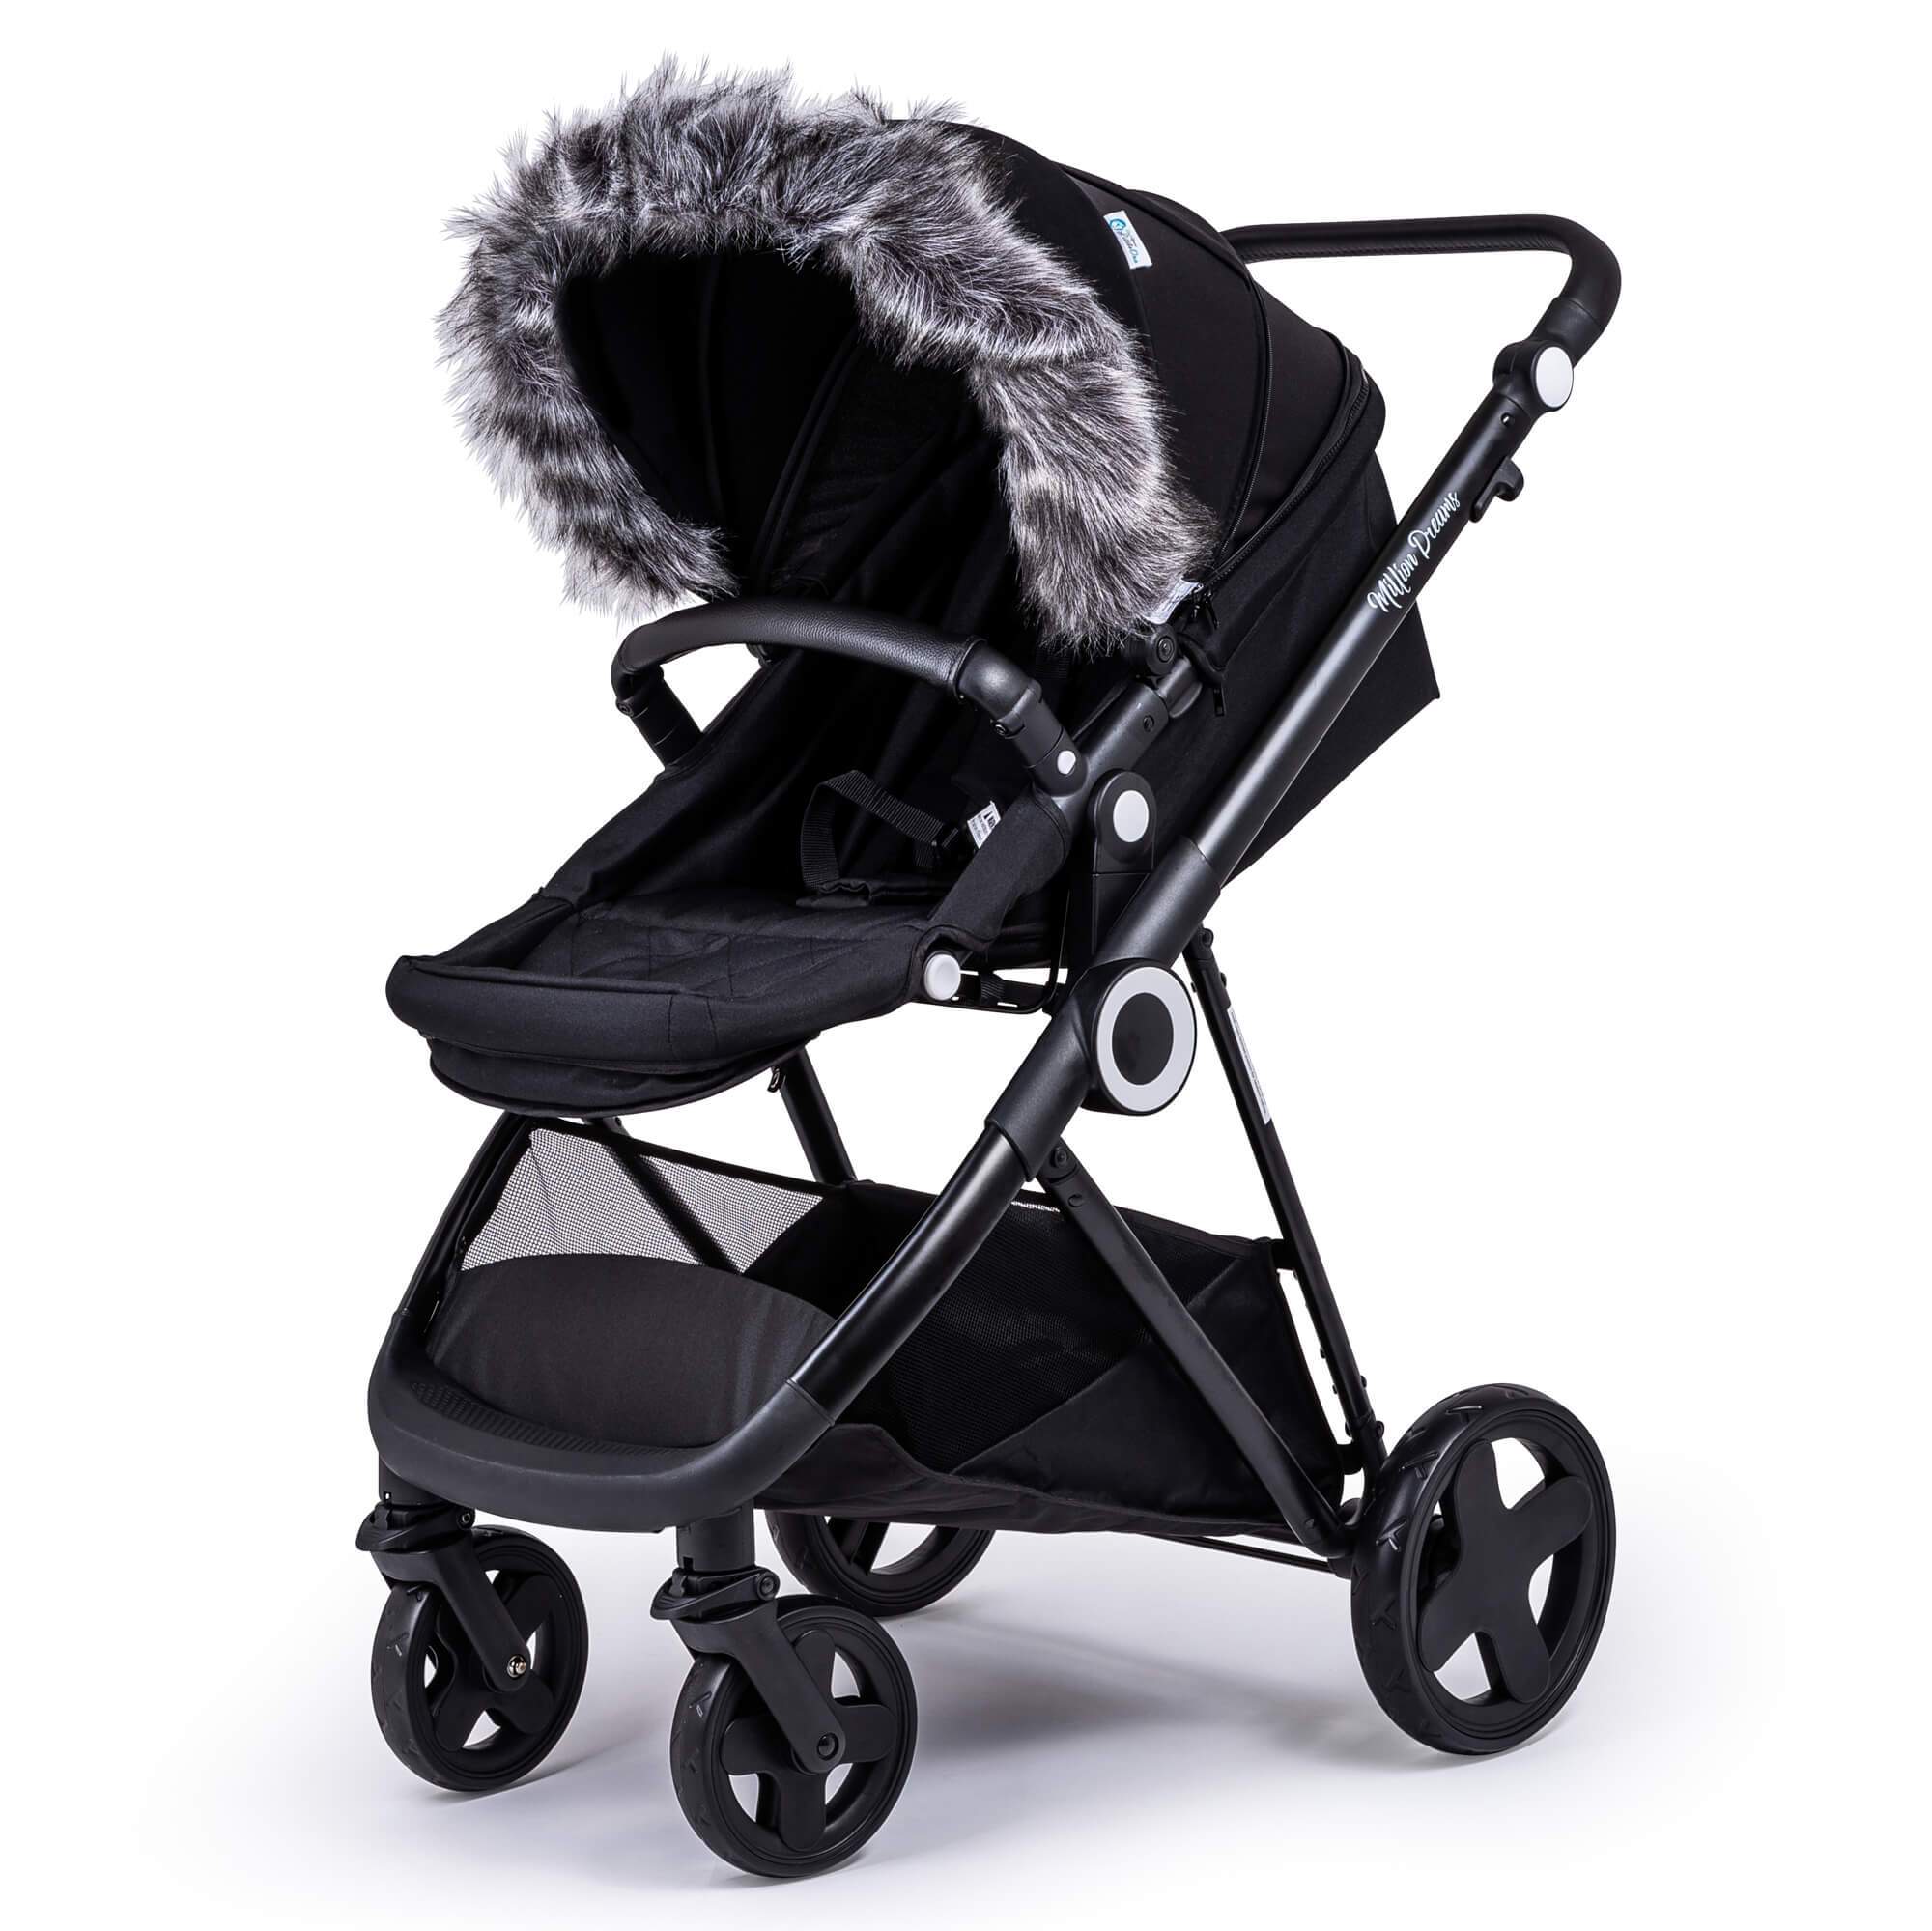 Pram Fur Hood Trim Attachment for Pushchair Compatible with BOB - Dark Grey / Fits All Models | For Your Little One